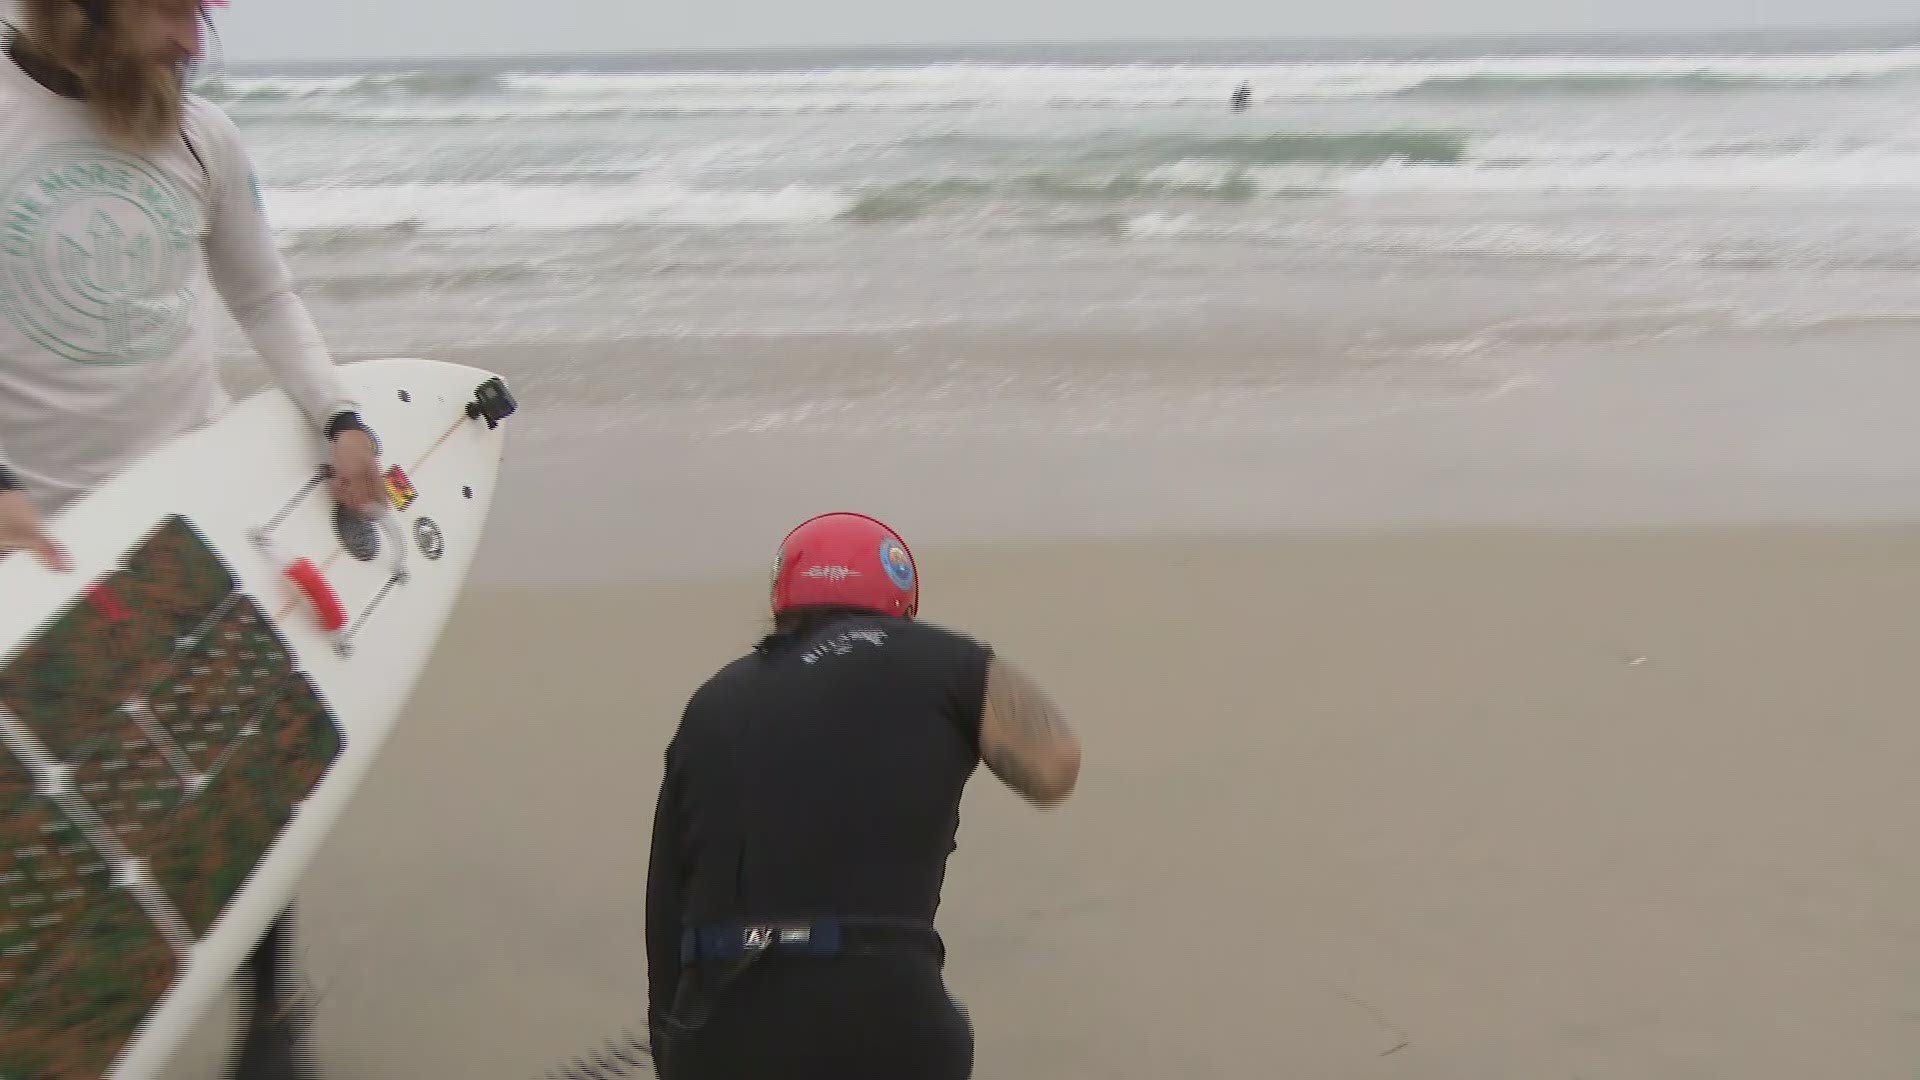 Purple Heart recipient Jose Martinez uses the joy of surfing to beat suicidal thoughts.